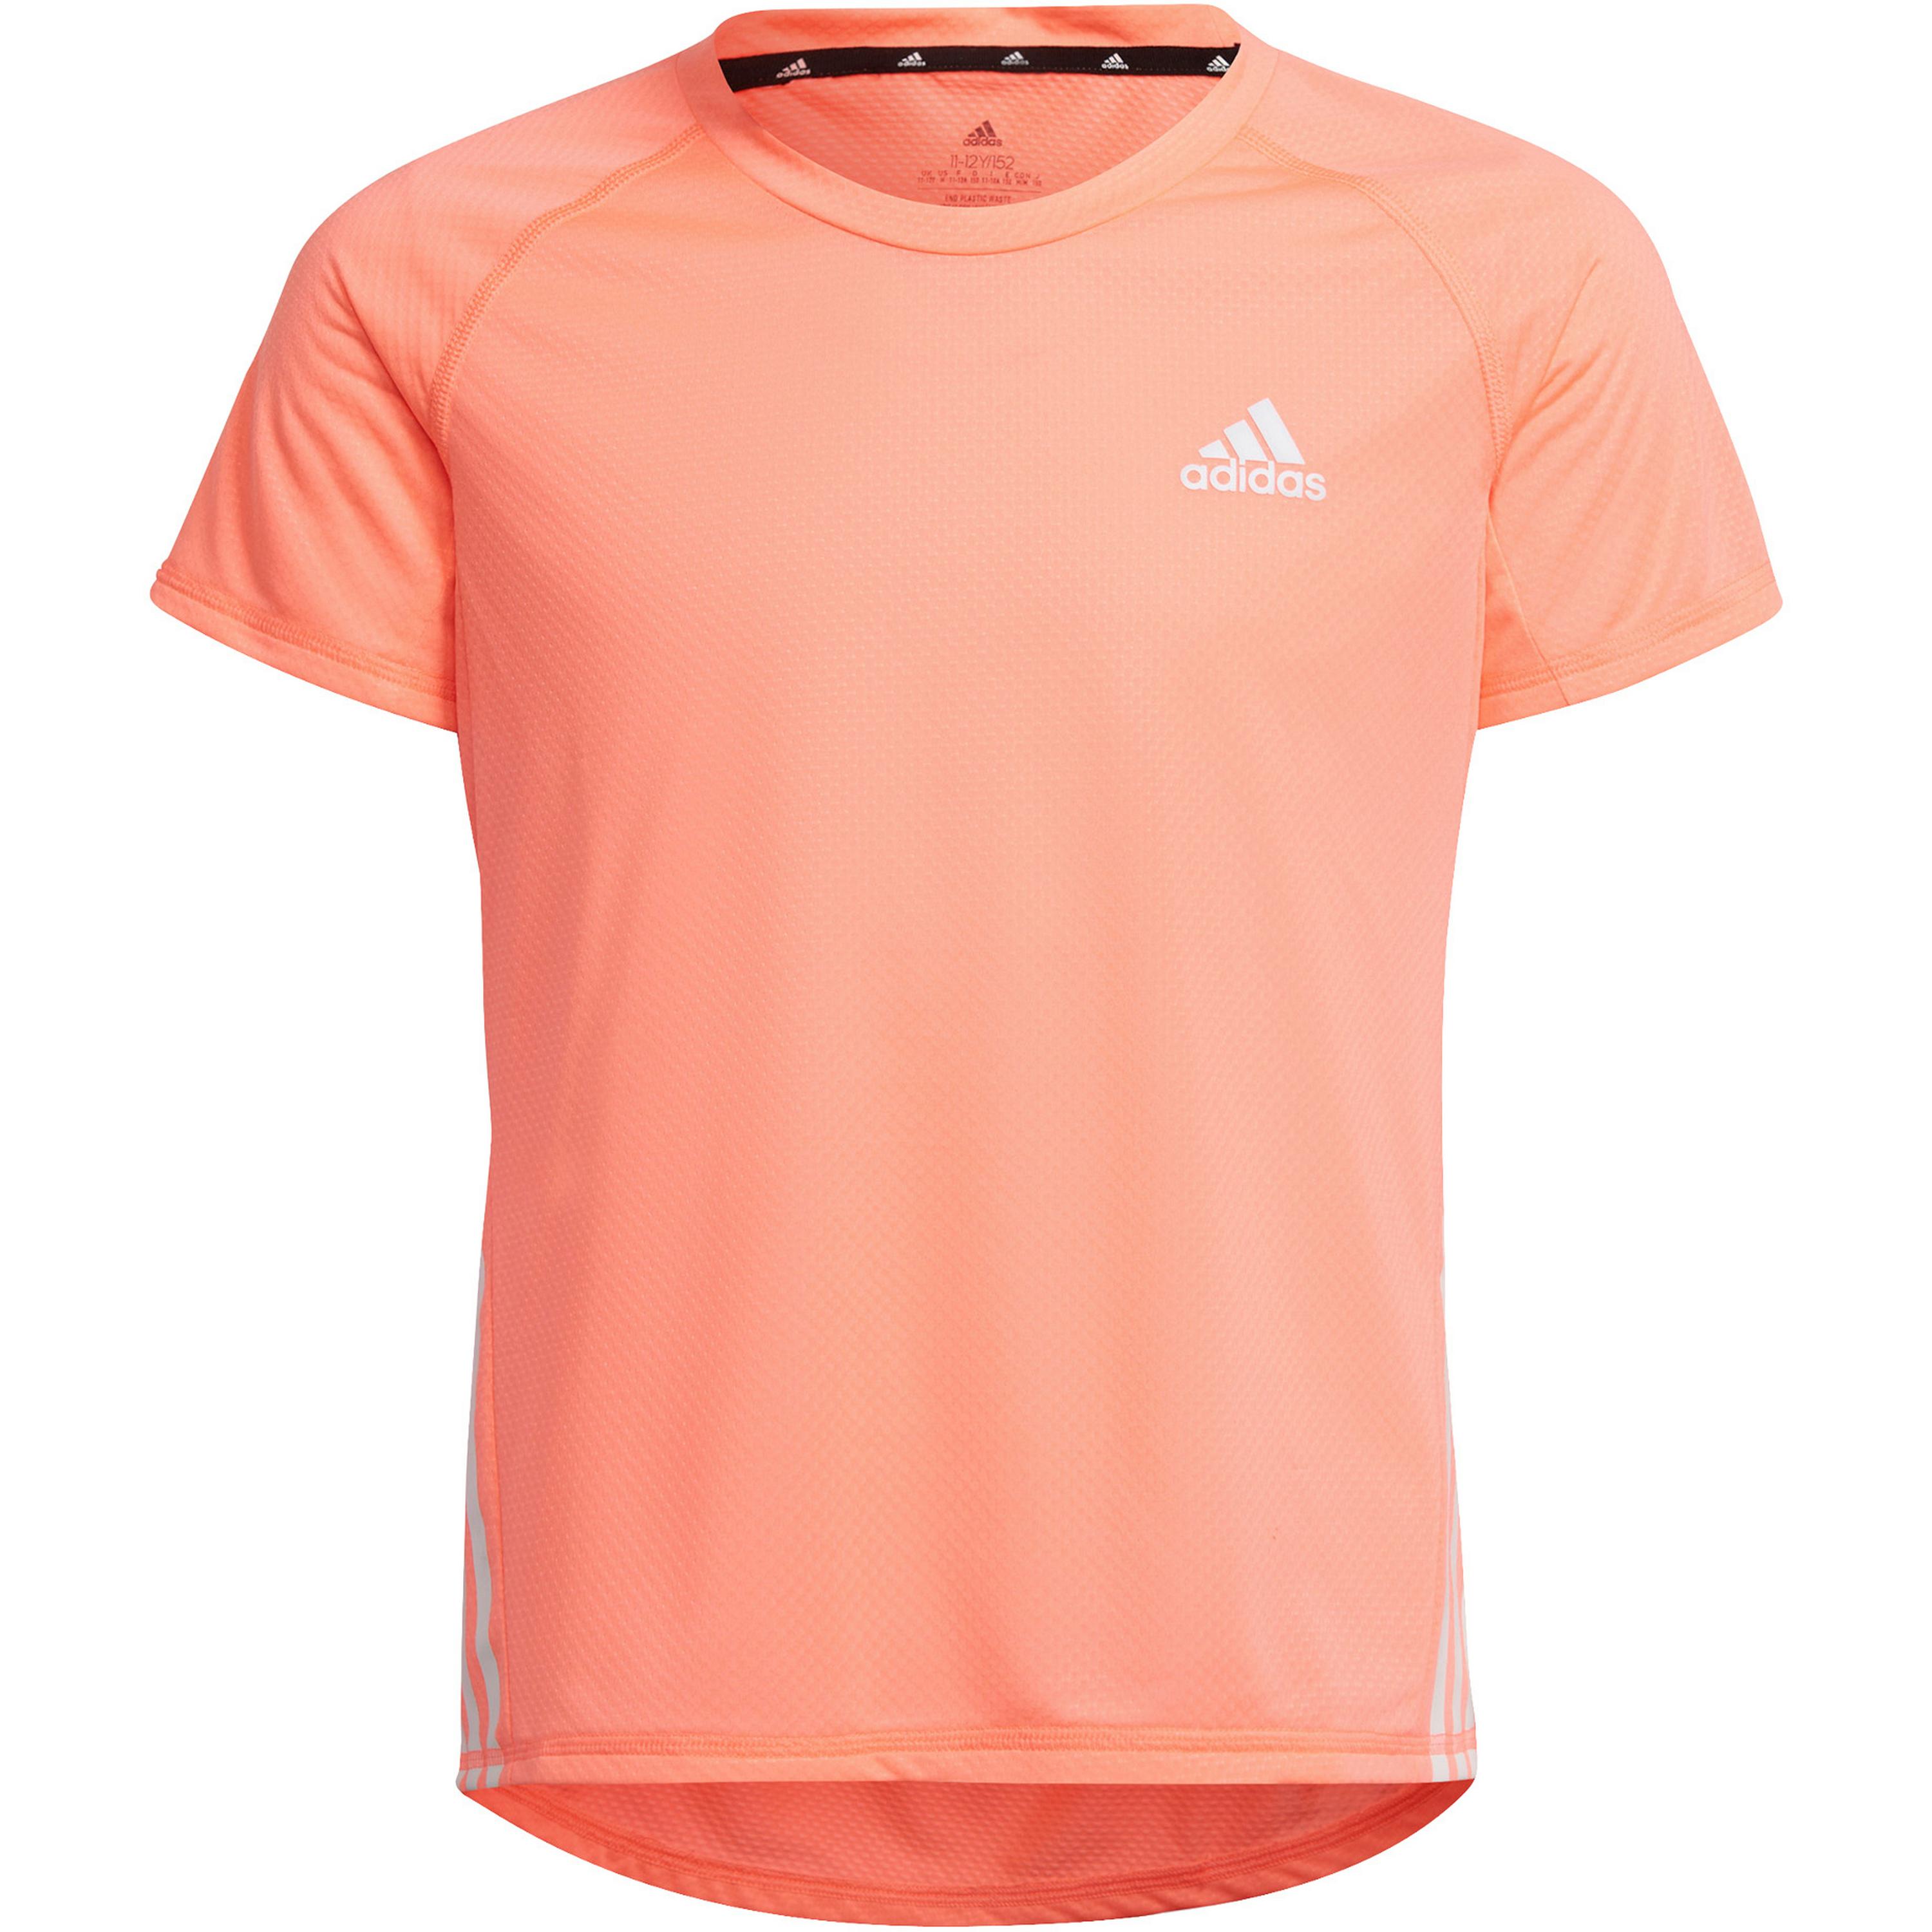 Image of adidas 3-STRIPES SPORT ICONS Funktionsshirt Mädchen